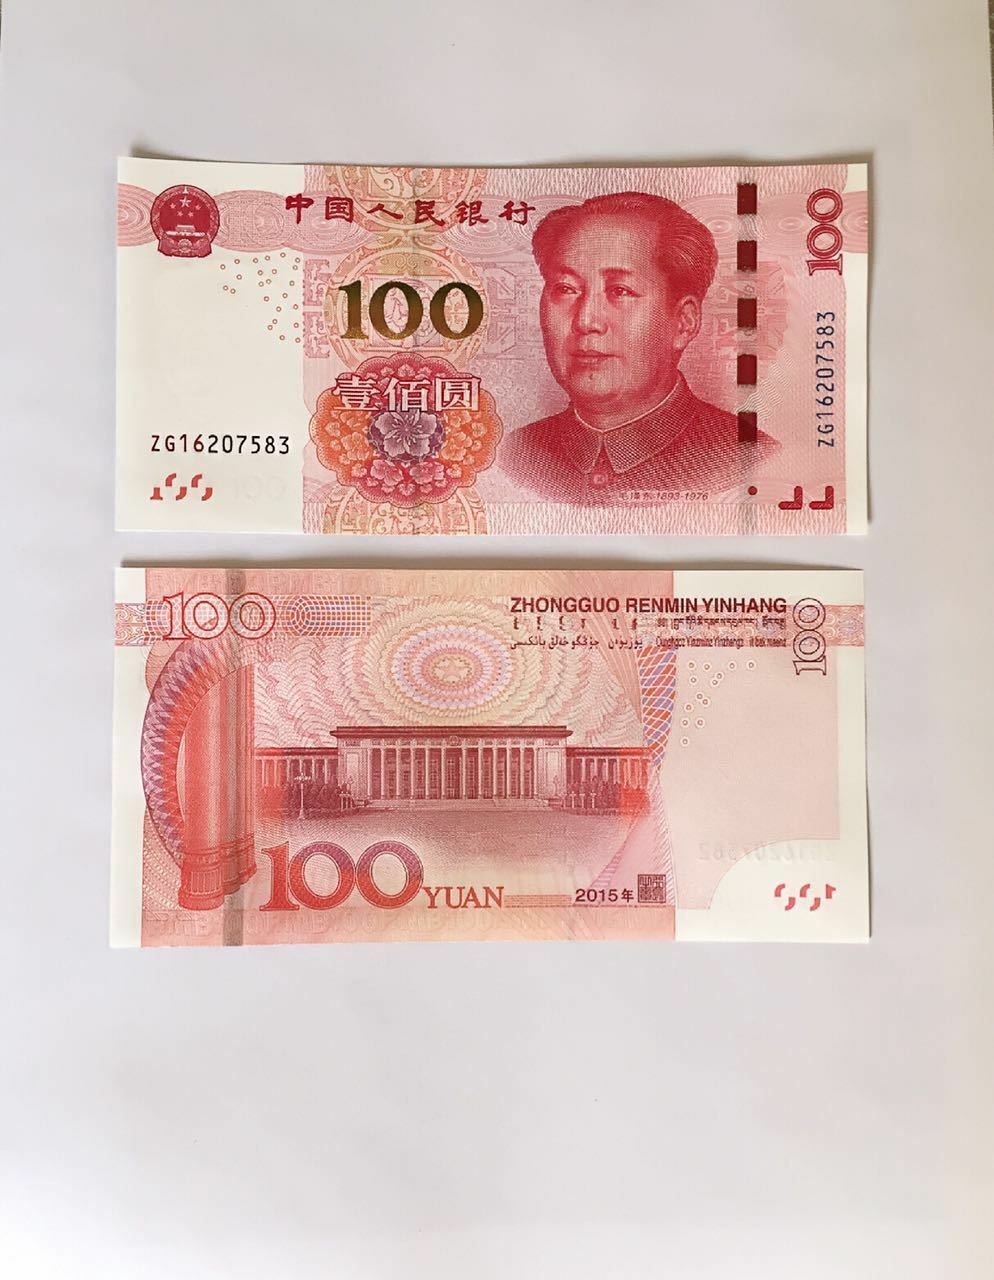 2015 CHINA 100 YUAN MAO CHINESE CURRENCY RMB MONEY BANKNOTE CIRCULATE NM - MINT